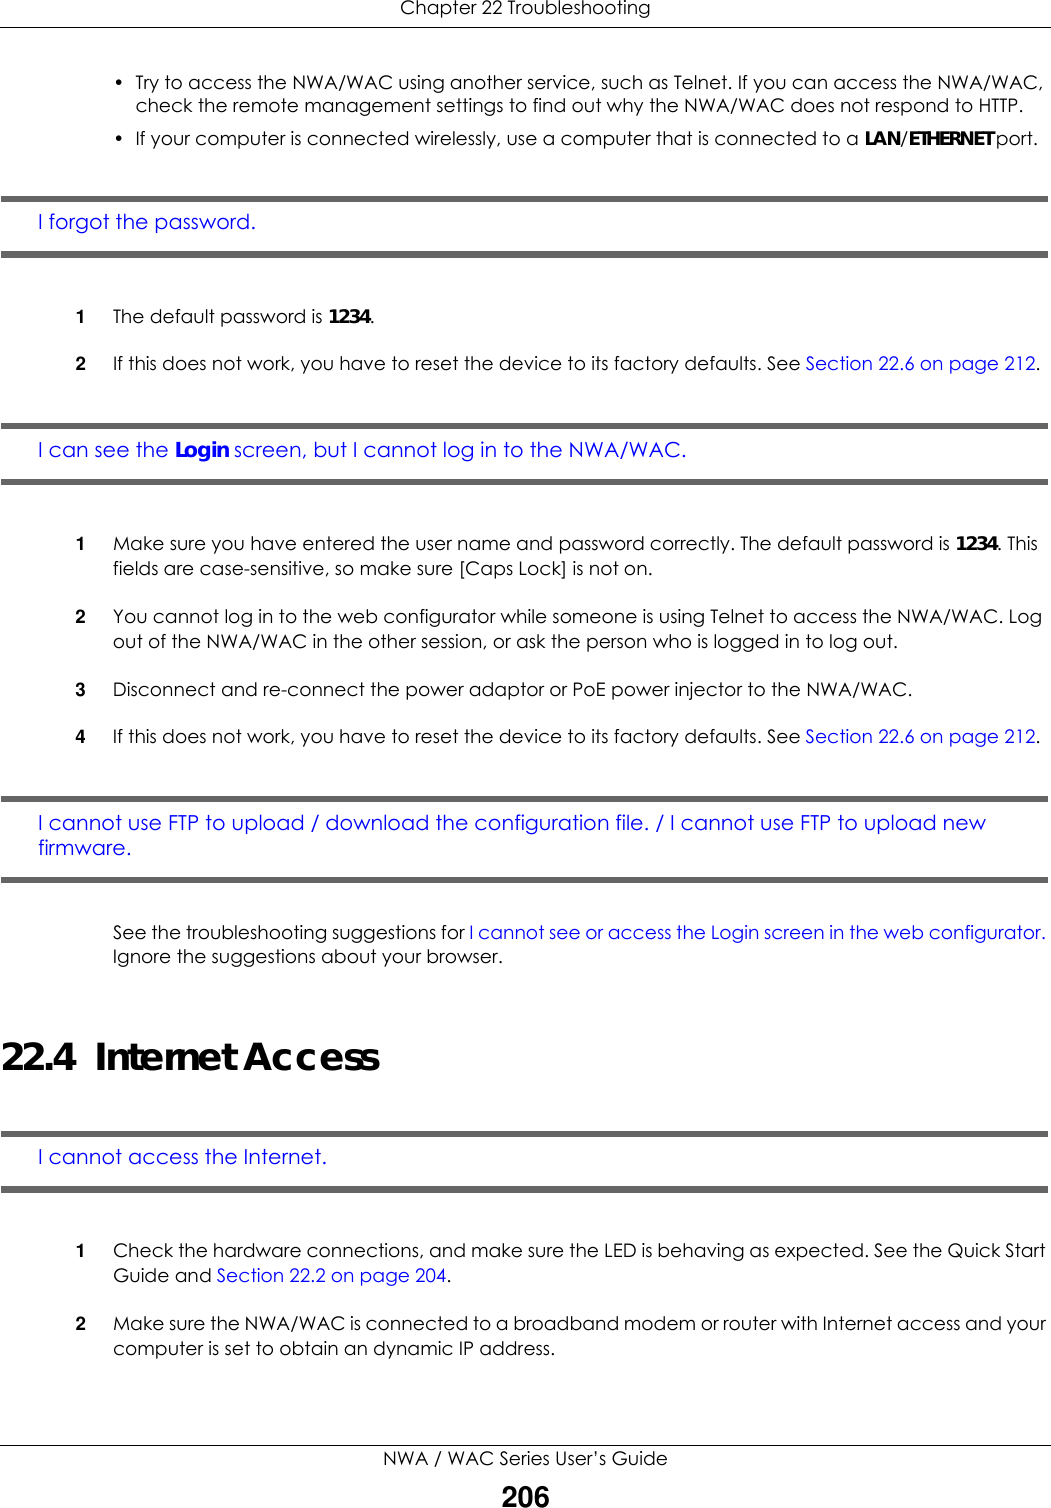 Chapter 22 TroubleshootingNWA / WAC Series User’s Guide206• Try to access the NWA/WAC using another service, such as Telnet. If you can access the NWA/WAC, check the remote management settings to find out why the NWA/WAC does not respond to HTTP. • If your computer is connected wirelessly, use a computer that is connected to a LAN/ETHERNET port.I forgot the password.1The default password is 1234.2If this does not work, you have to reset the device to its factory defaults. See Section 22.6 on page 212.I can see the Login screen, but I cannot log in to the NWA/WAC.1Make sure you have entered the user name and password correctly. The default password is 1234. This fields are case-sensitive, so make sure [Caps Lock] is not on.2You cannot log in to the web configurator while someone is using Telnet to access the NWA/WAC. Log out of the NWA/WAC in the other session, or ask the person who is logged in to log out.3Disconnect and re-connect the power adaptor or PoE power injector to the NWA/WAC. 4If this does not work, you have to reset the device to its factory defaults. See Section 22.6 on page 212.I cannot use FTP to upload / download the configuration file. / I cannot use FTP to upload new firmware. See the troubleshooting suggestions for I cannot see or access the Login screen in the web configurator. Ignore the suggestions about your browser.22.4  Internet AccessI cannot access the Internet.1Check the hardware connections, and make sure the LED is behaving as expected. See the Quick Start Guide and Section 22.2 on page 204.2Make sure the NWA/WAC is connected to a broadband modem or router with Internet access and your computer is set to obtain an dynamic IP address.